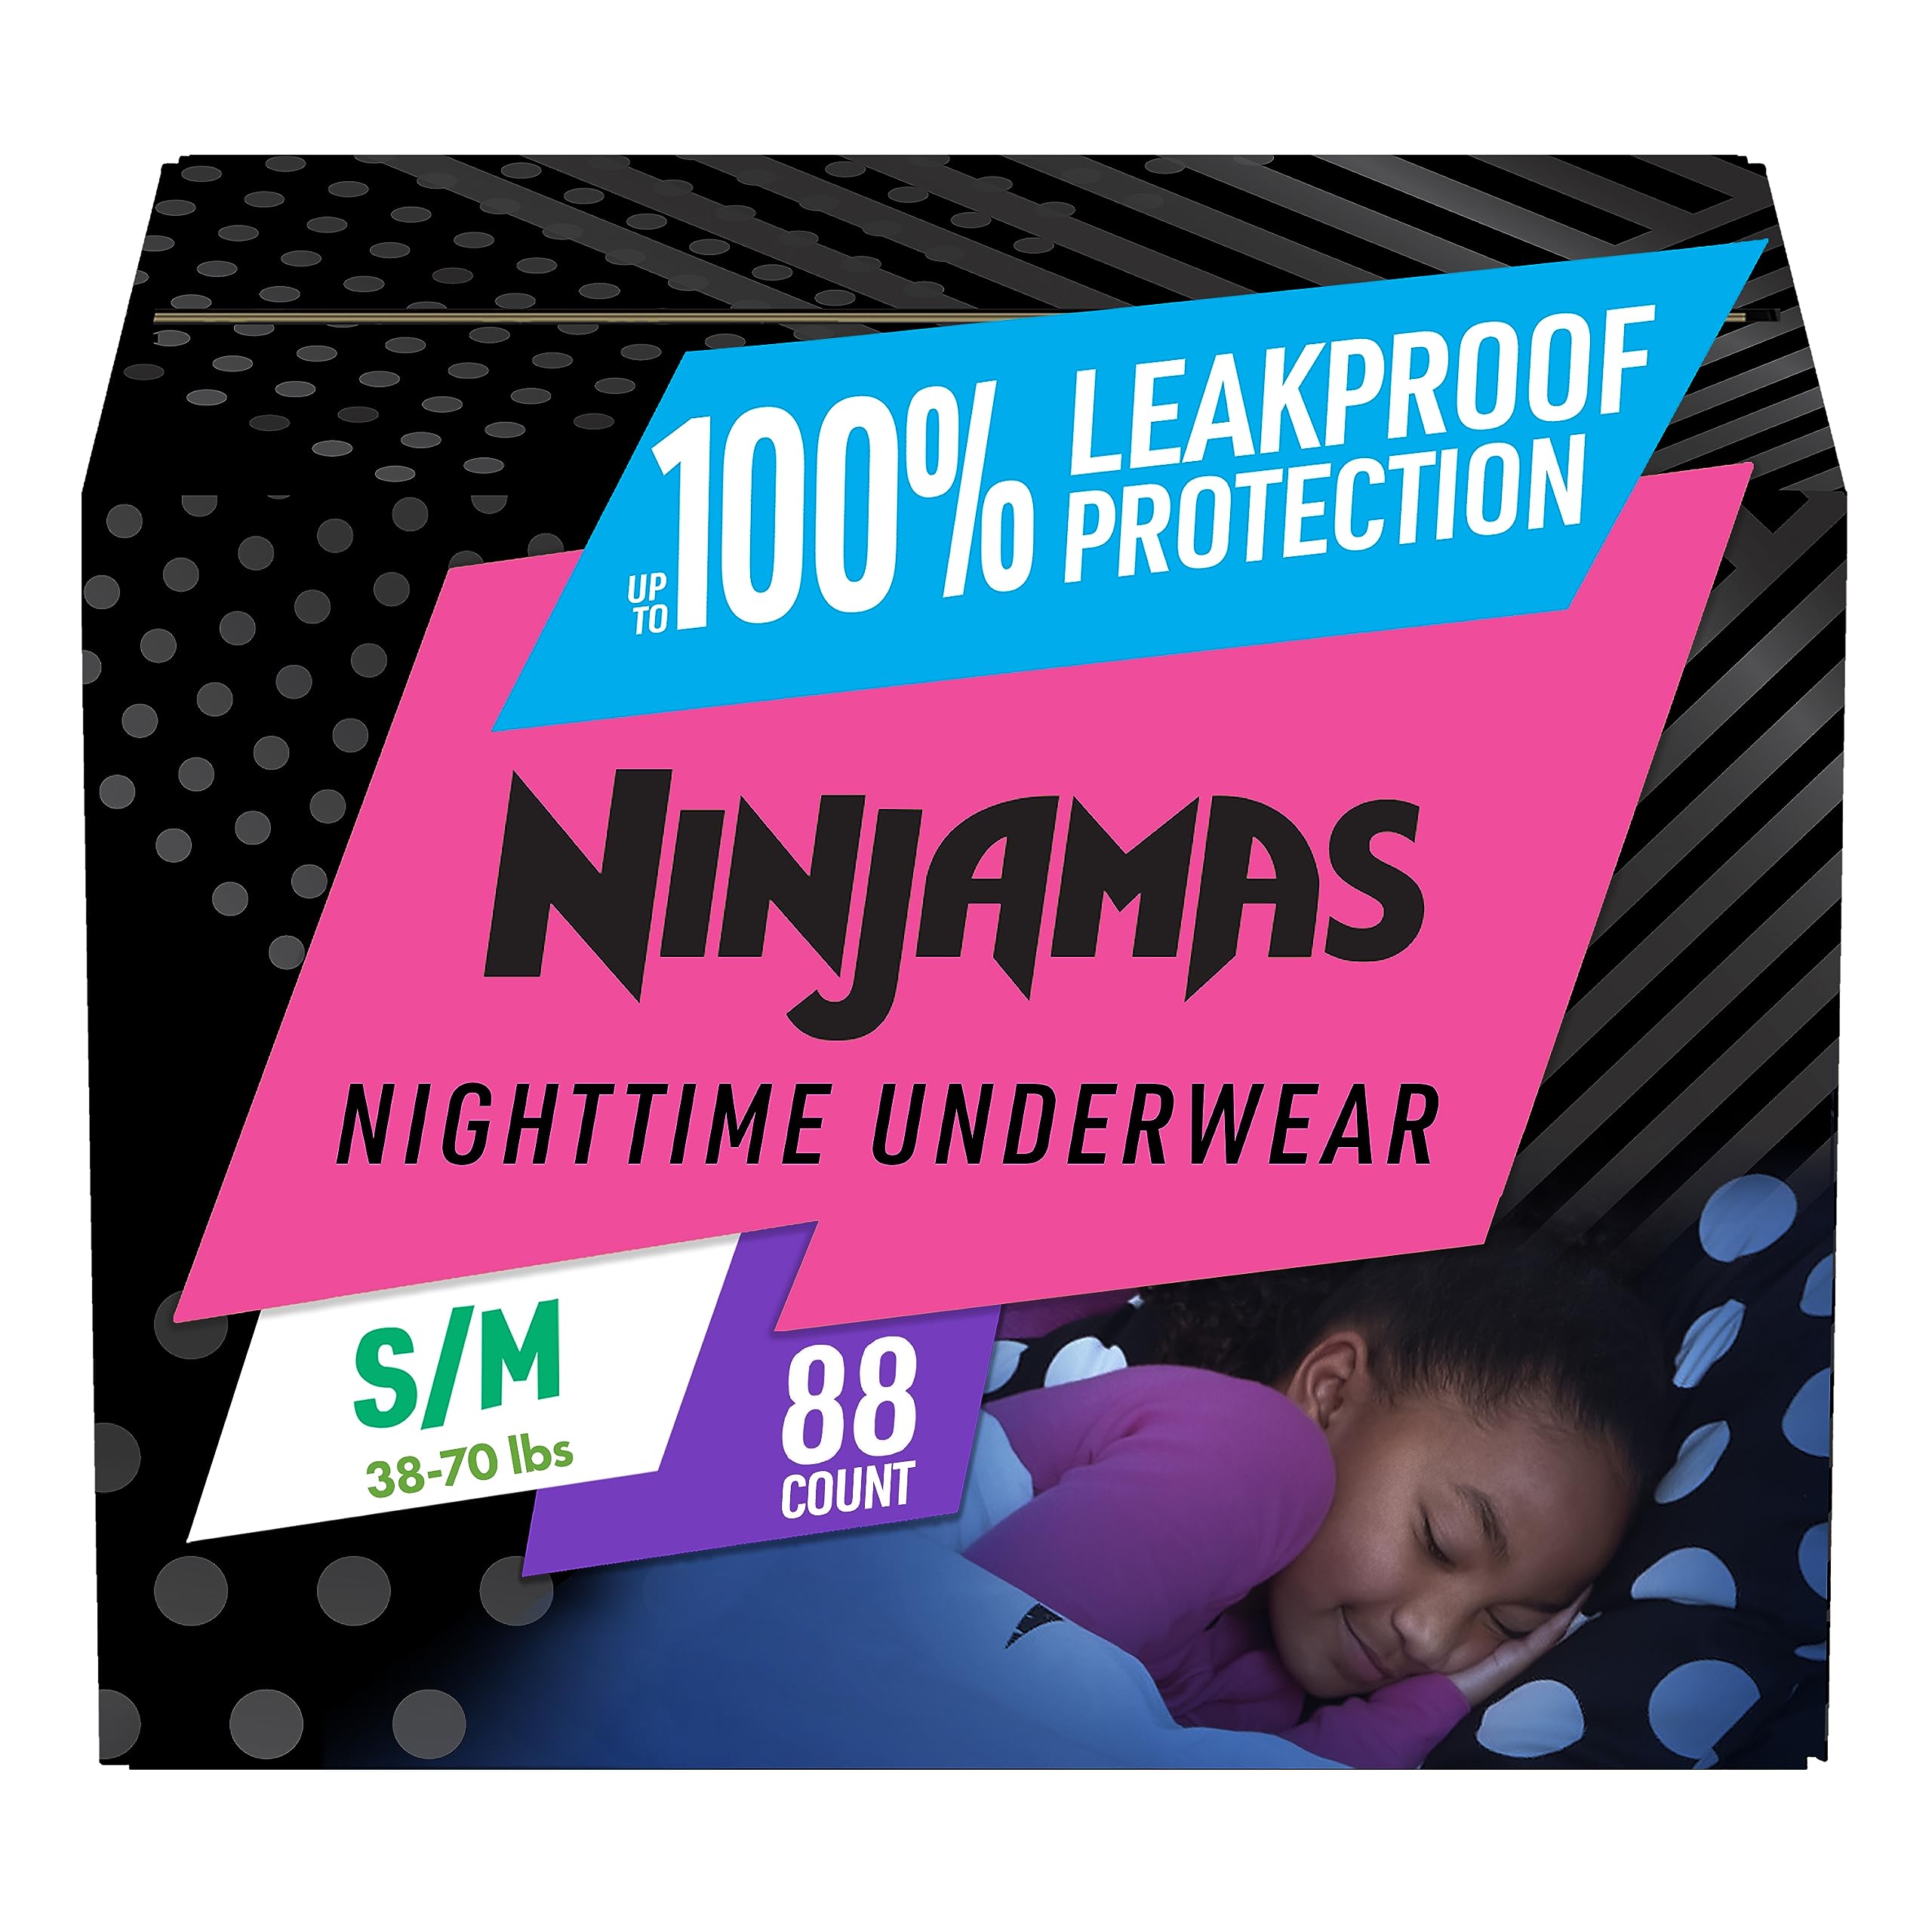 Buy Pampers Ninjamas Nighttime Bedwetting Underwear Girls Size S/M (38-65  lbs) 88 Count (Packaging & Prints May Vary)